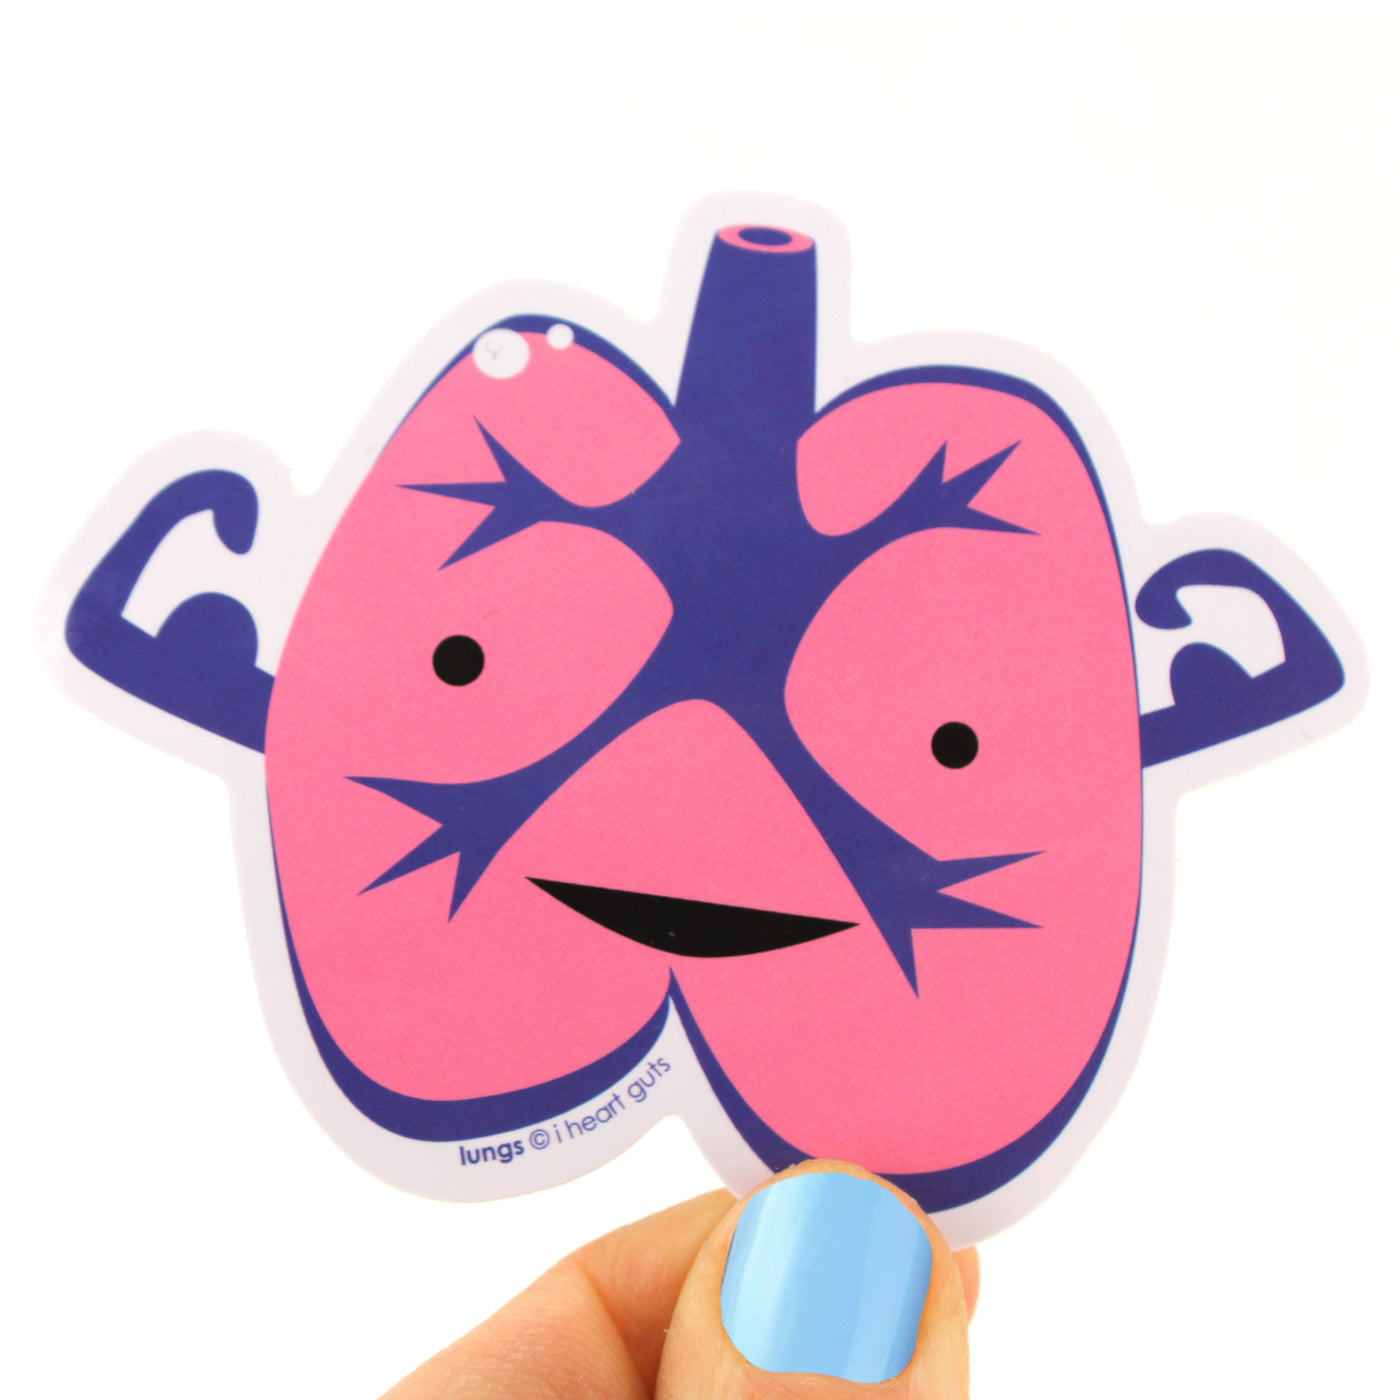 Lung Stickers | Cute Lung Stickers for Asthma, Cystic Fibrosis, COPD, Transplant